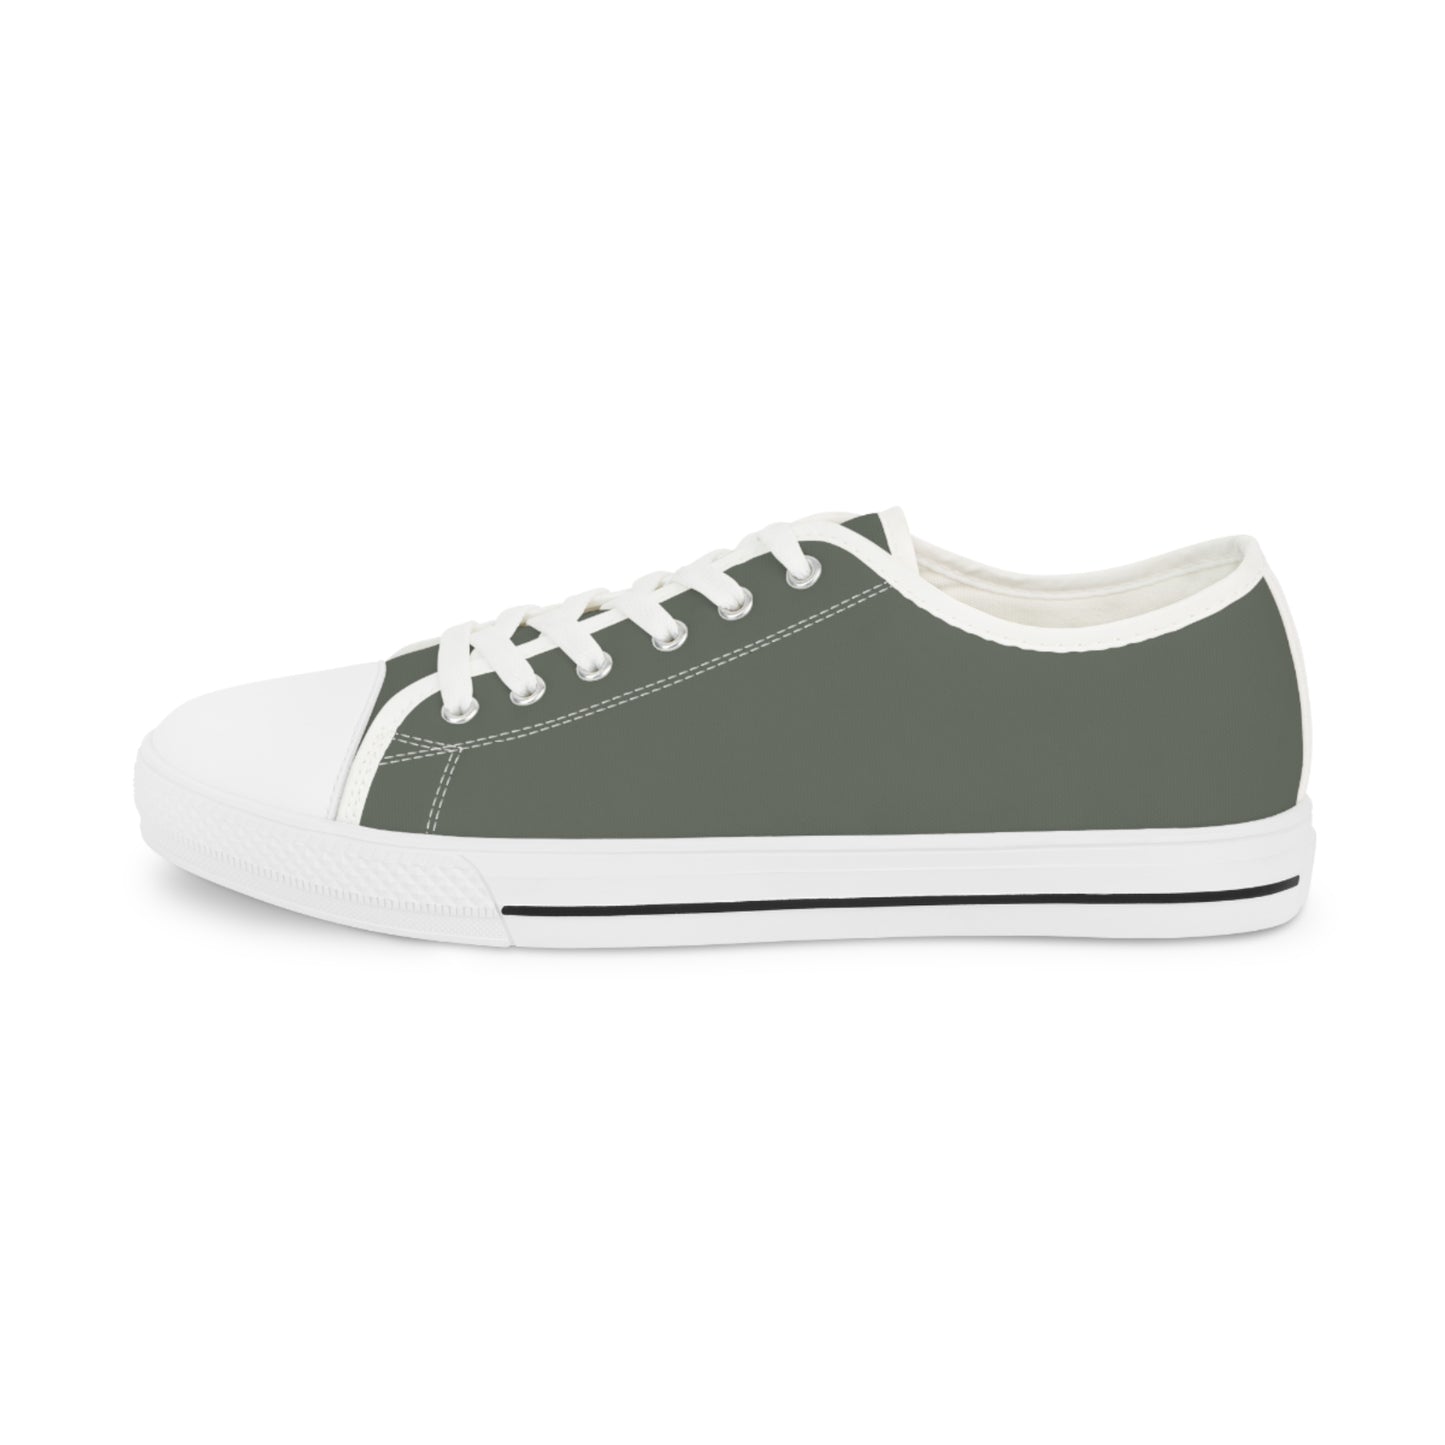 Men's Canvas Low Top Solid Color Sneakers - Drab Olive Gray US 14 Black sole